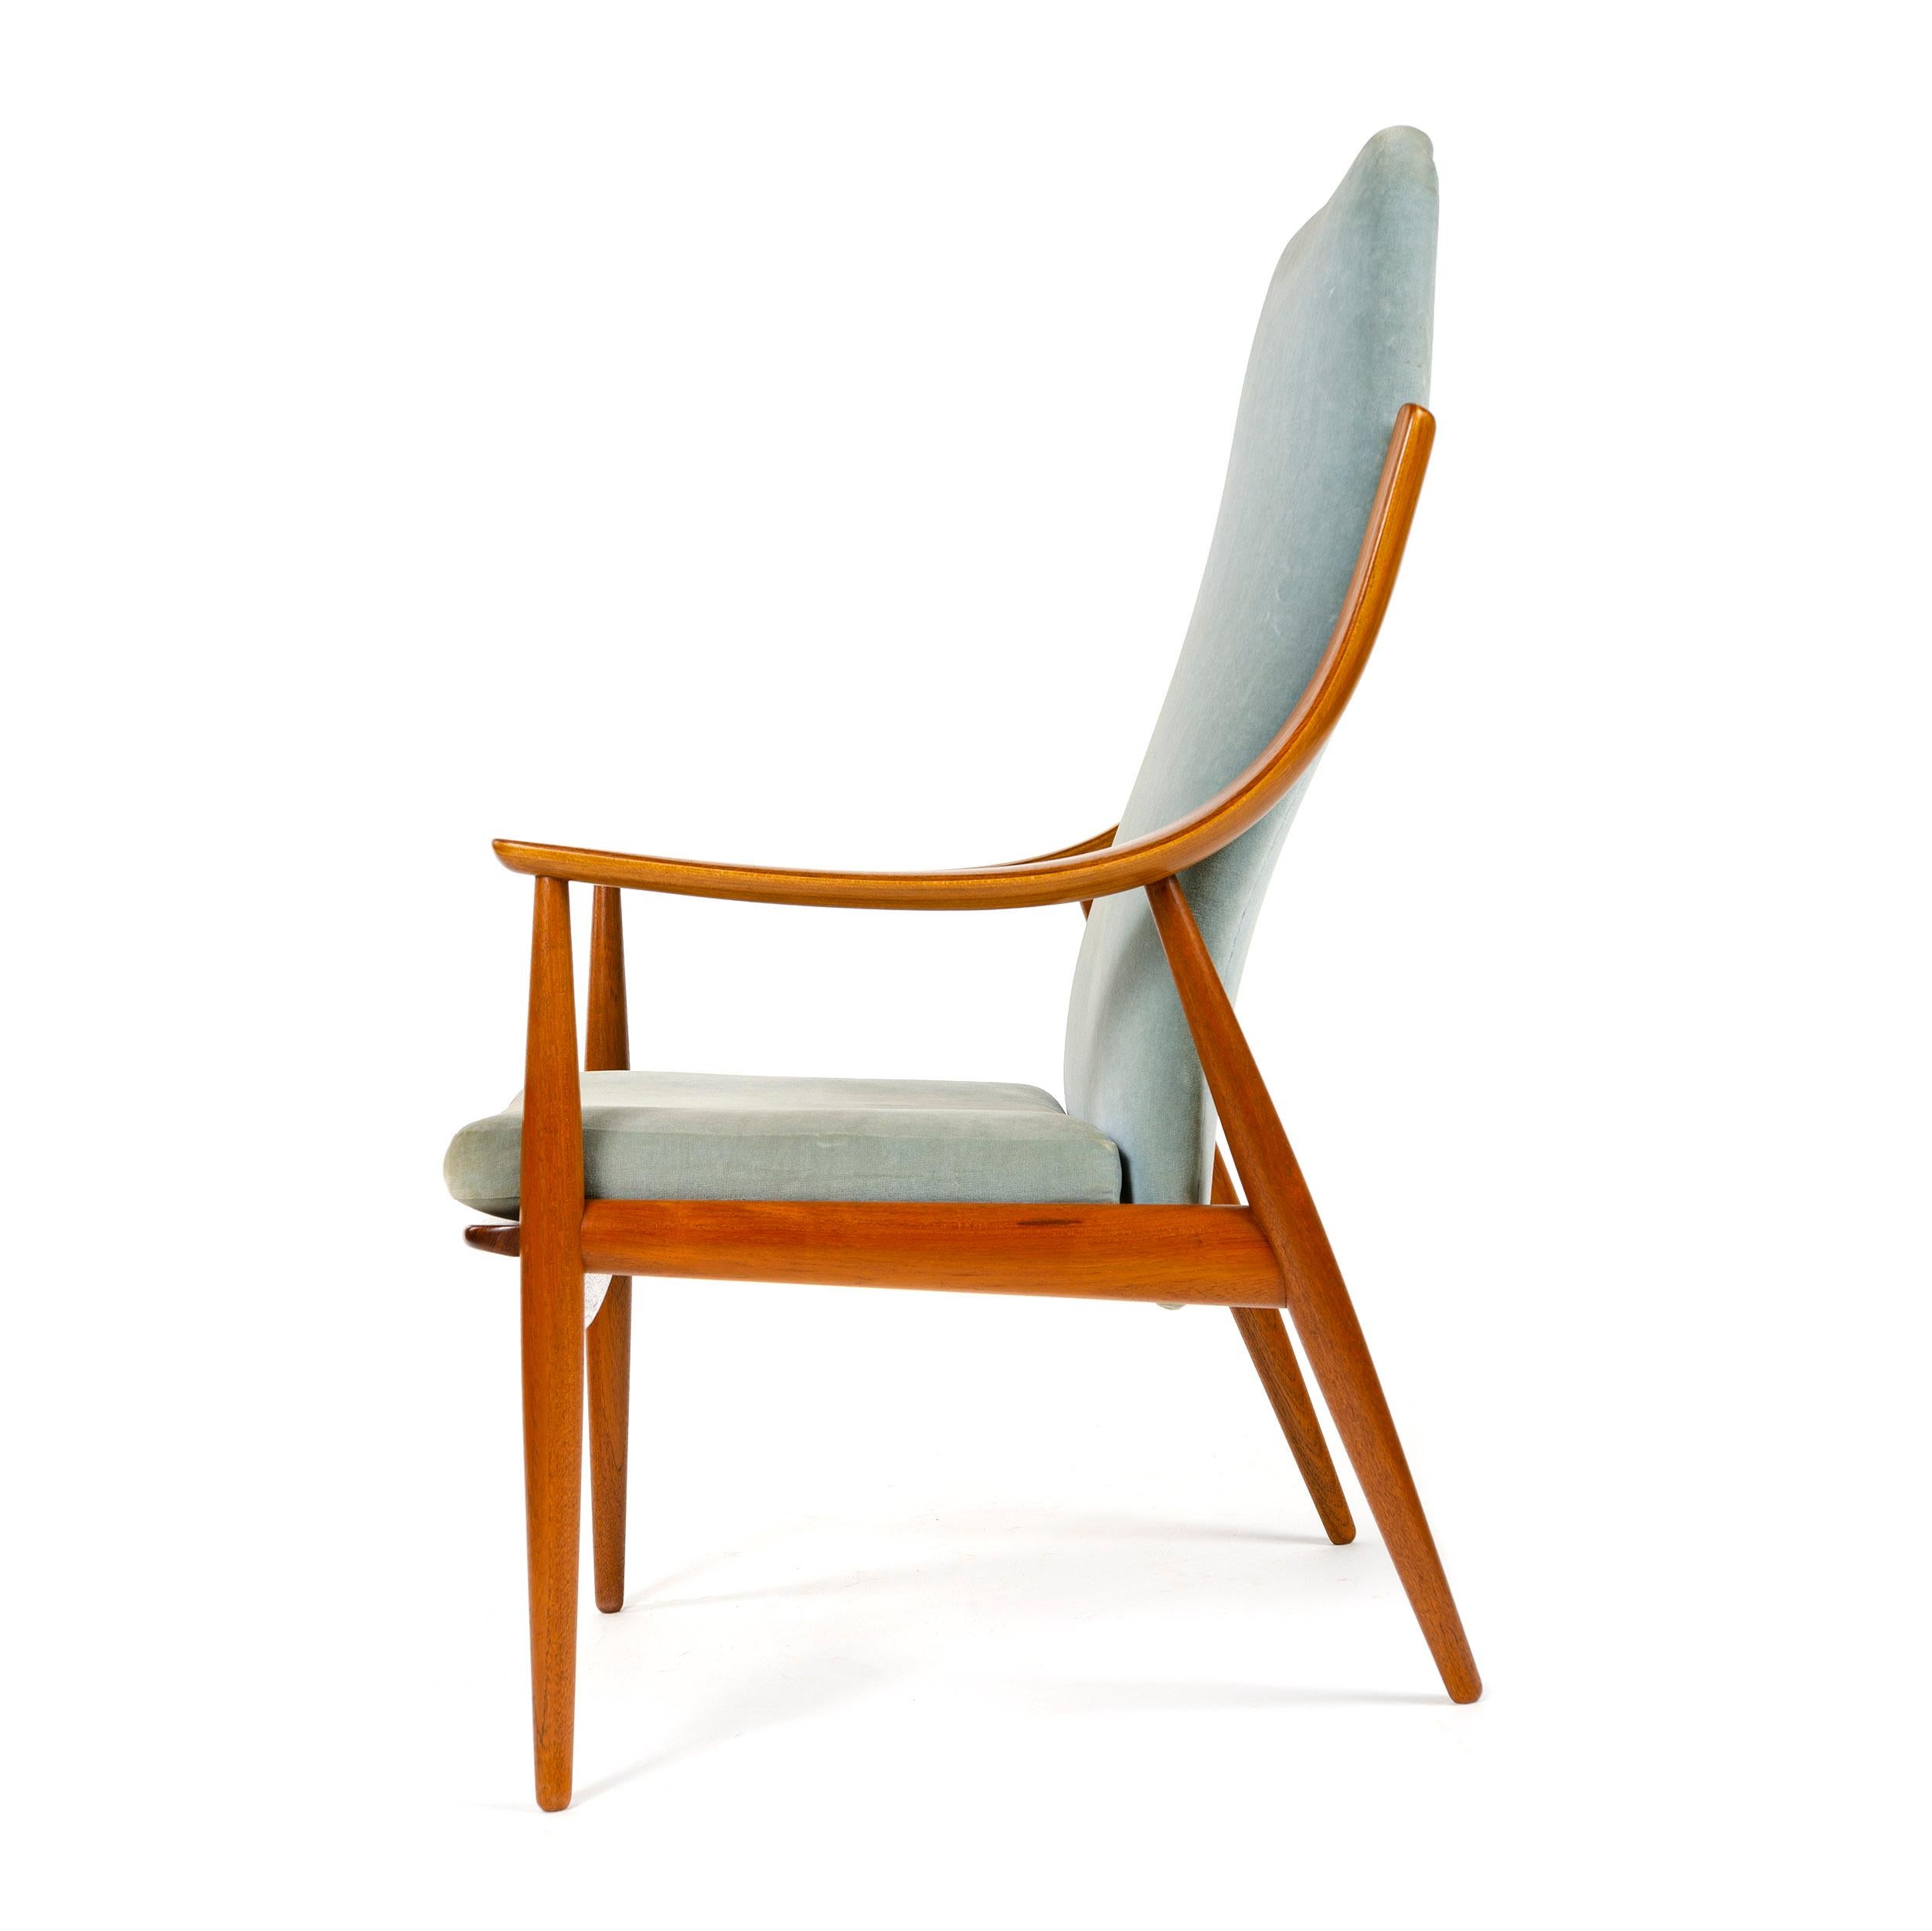 A high back armchair designed by Peter Hvidt & Orla Mölgaard-Nielsen having an exposed teak frame with expressive bent laminated curved arms and vintage blue upholstery. Made in Denmark by France and Daverkosen, circa 1950s.